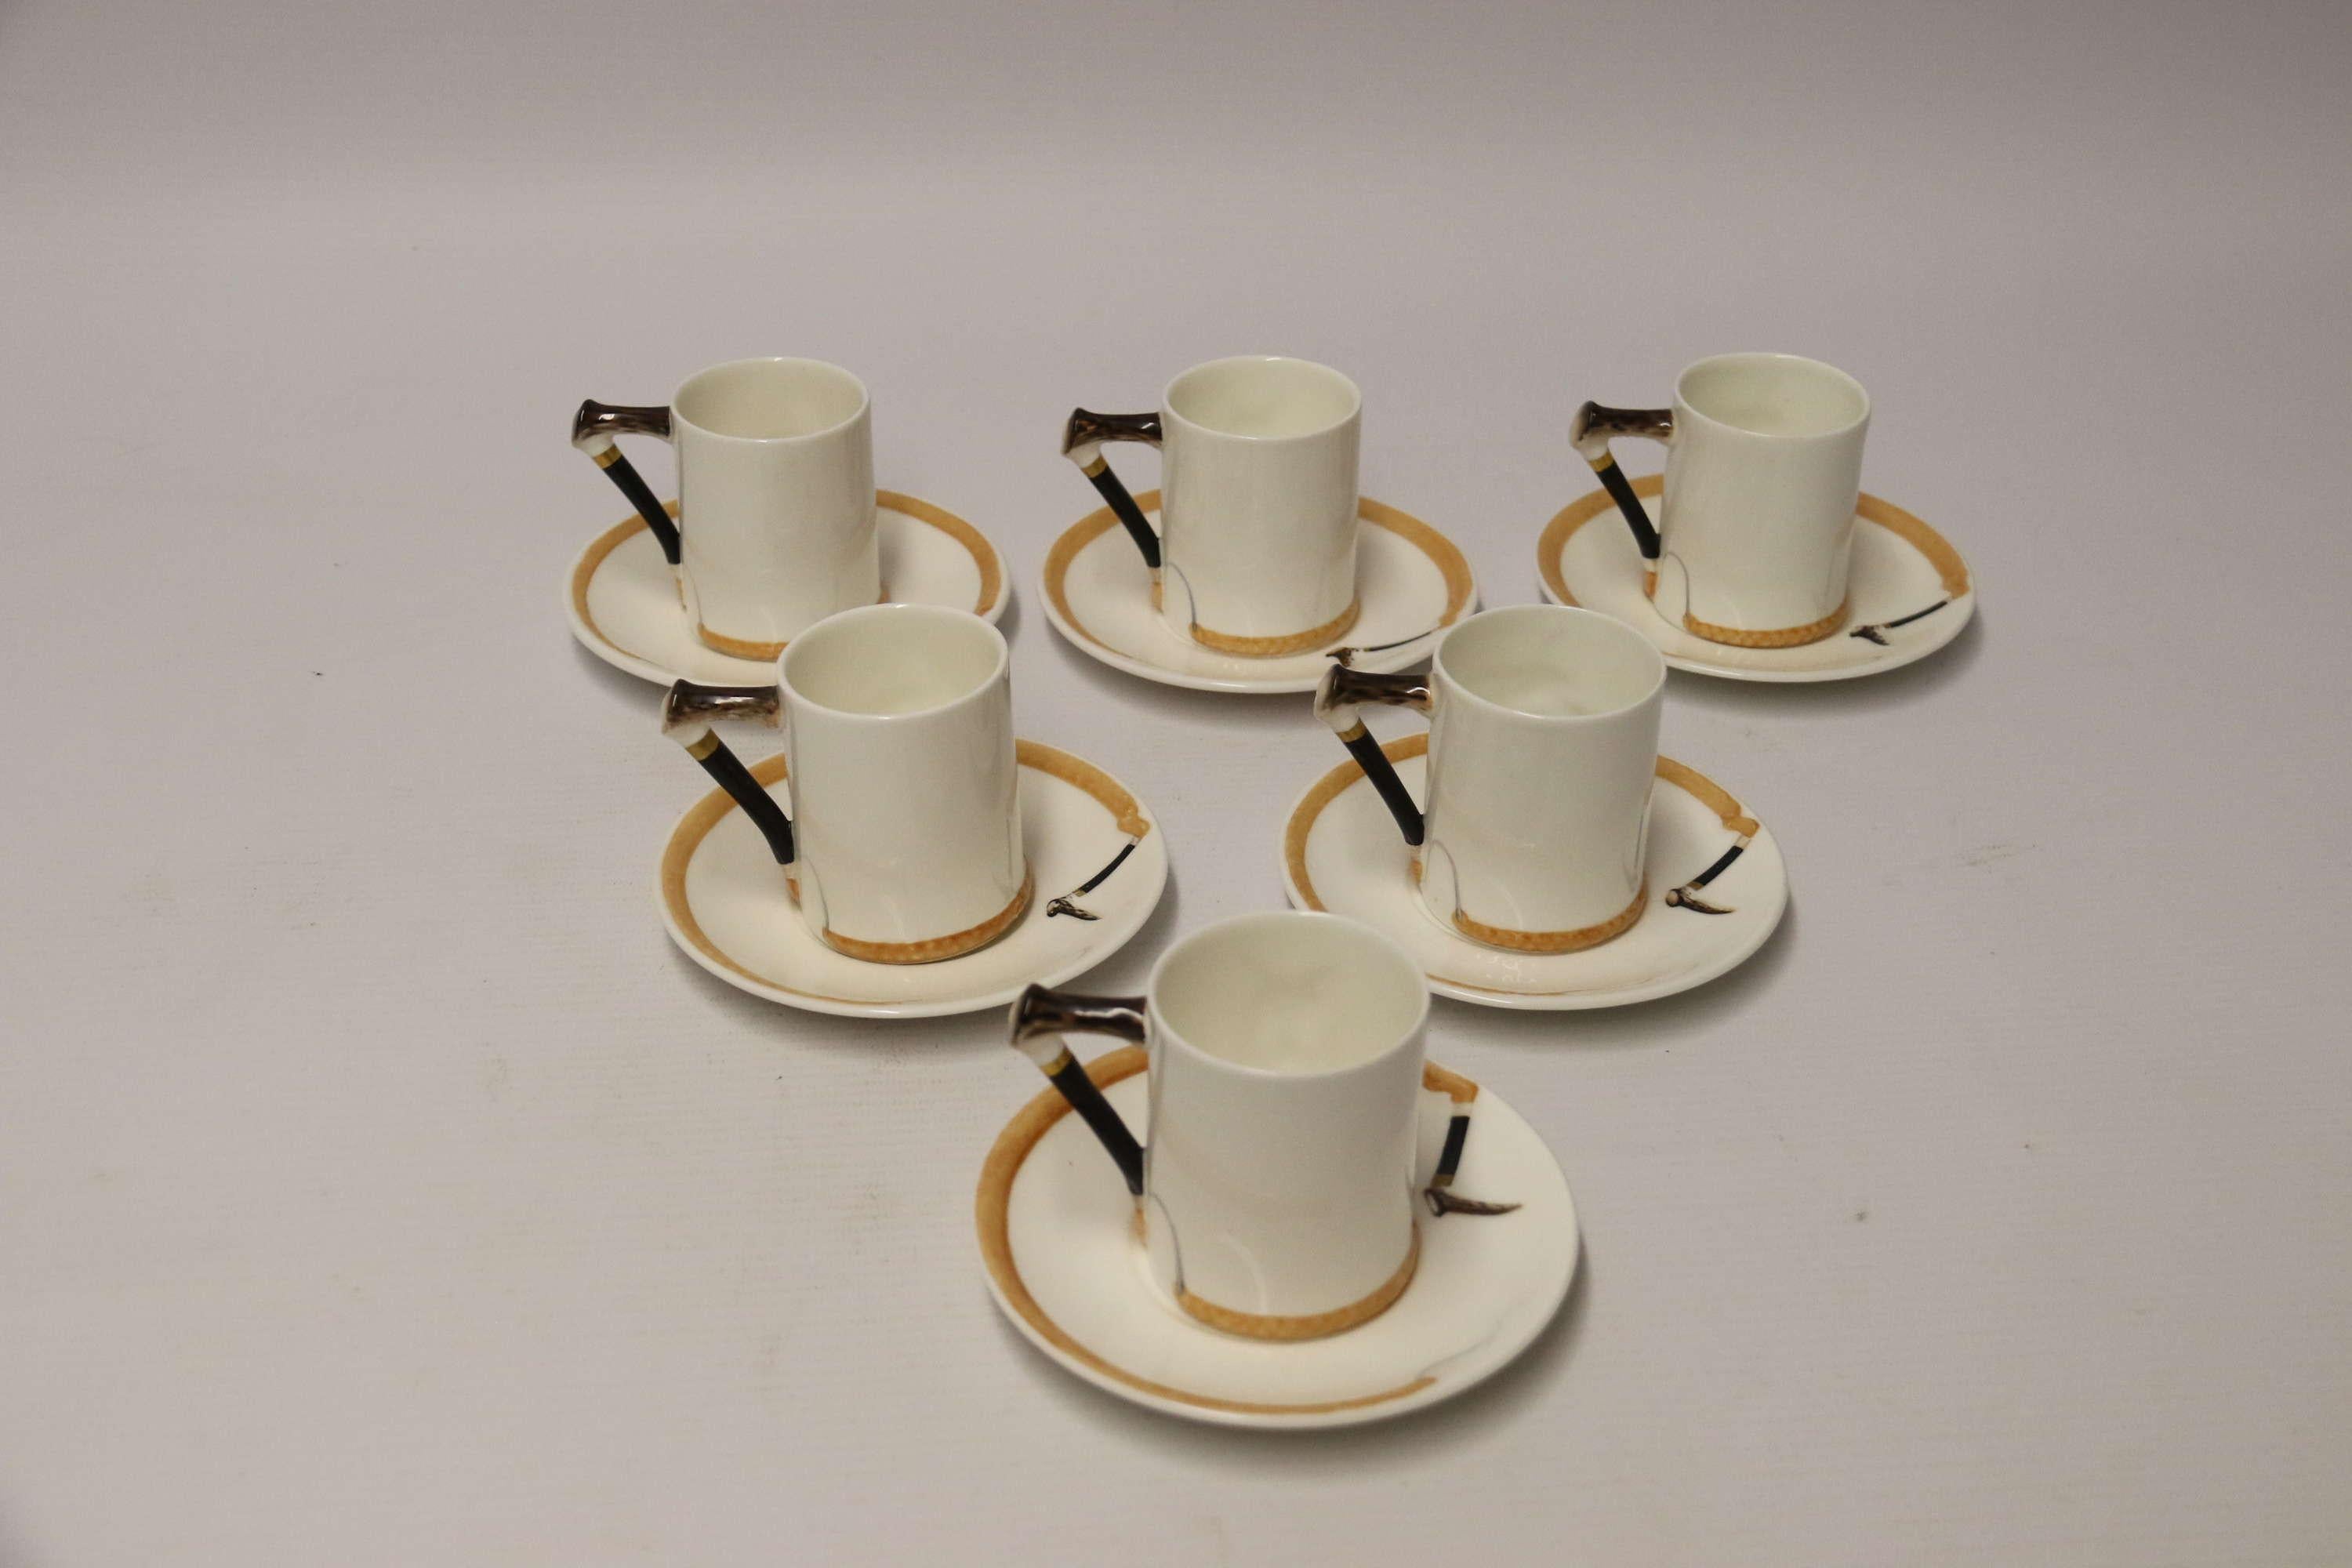 https://a.1stdibscdn.com/a-set-of-six-english-fox-hunting-royal-doulton-coffee-cups-and-saucers-c-1950-for-sale-picture-2/22569652/f_280124321648641739749/10786_2_master.jpg